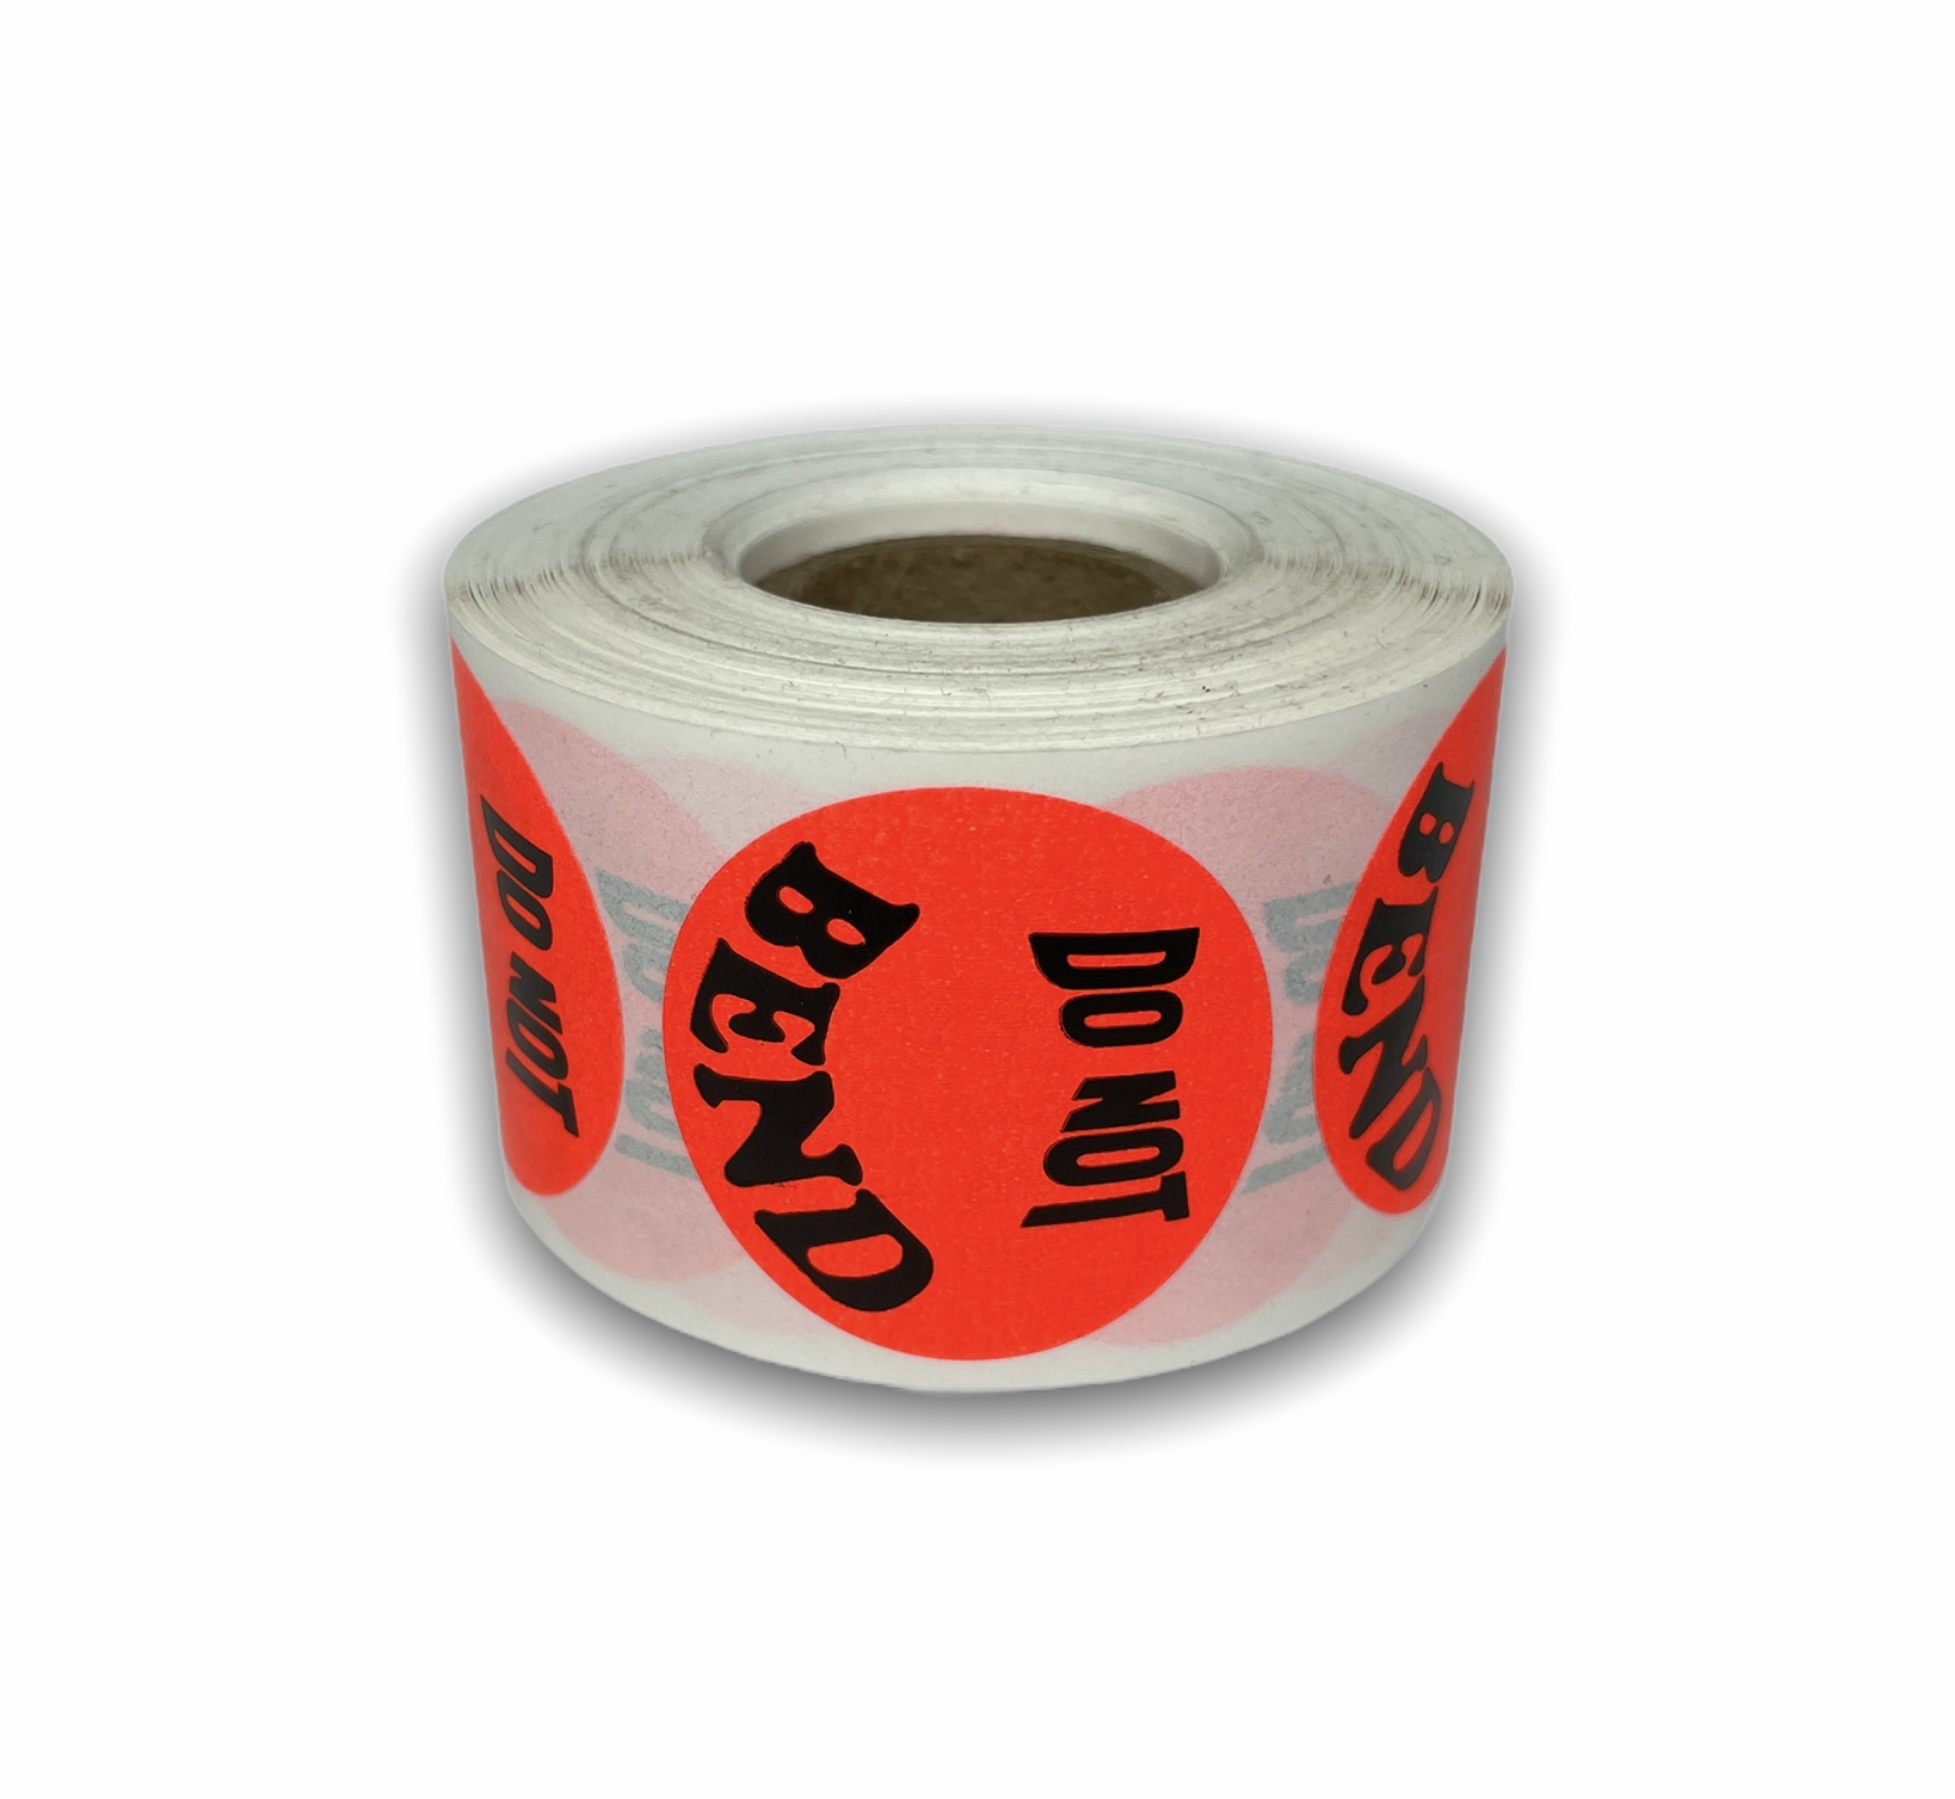 Do Not Bend Stickers | 1.5" Bright Red Circle | Self-adhesive | 300 Labels 1 Roll | Free Shipping!